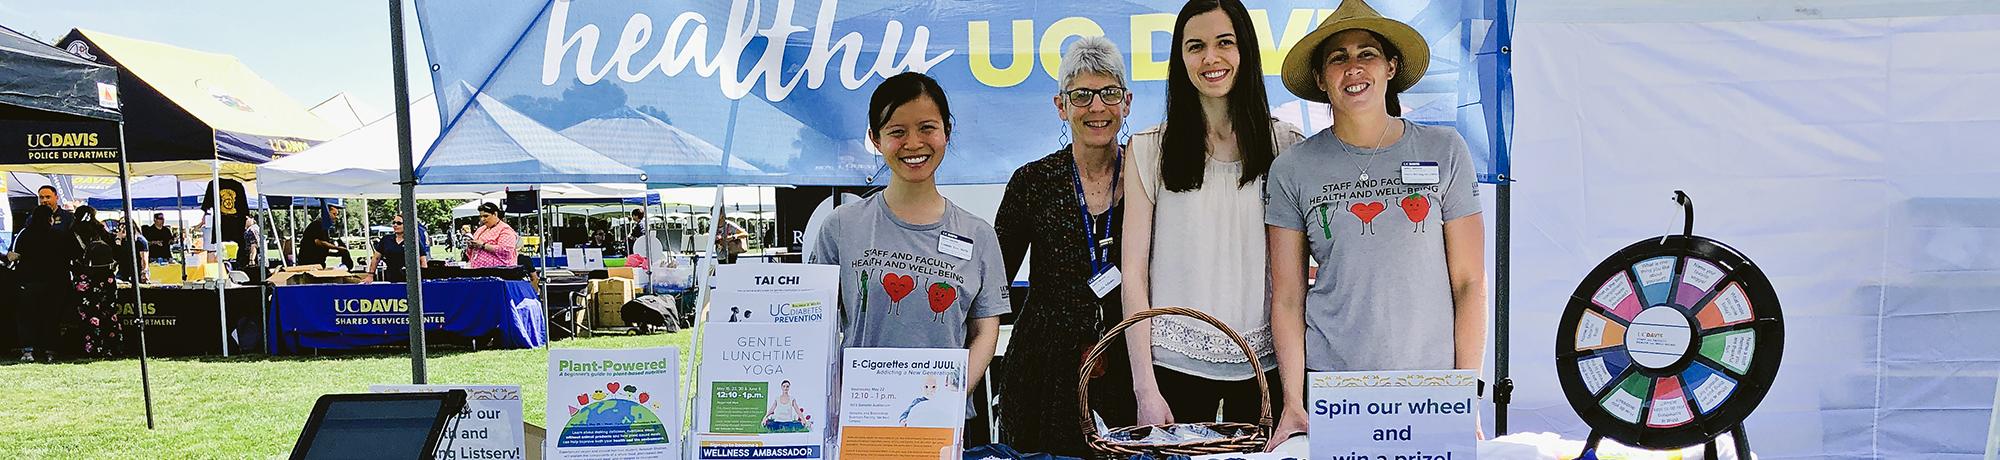 staff and faculty health and well-being team at a wellness fair uc davis